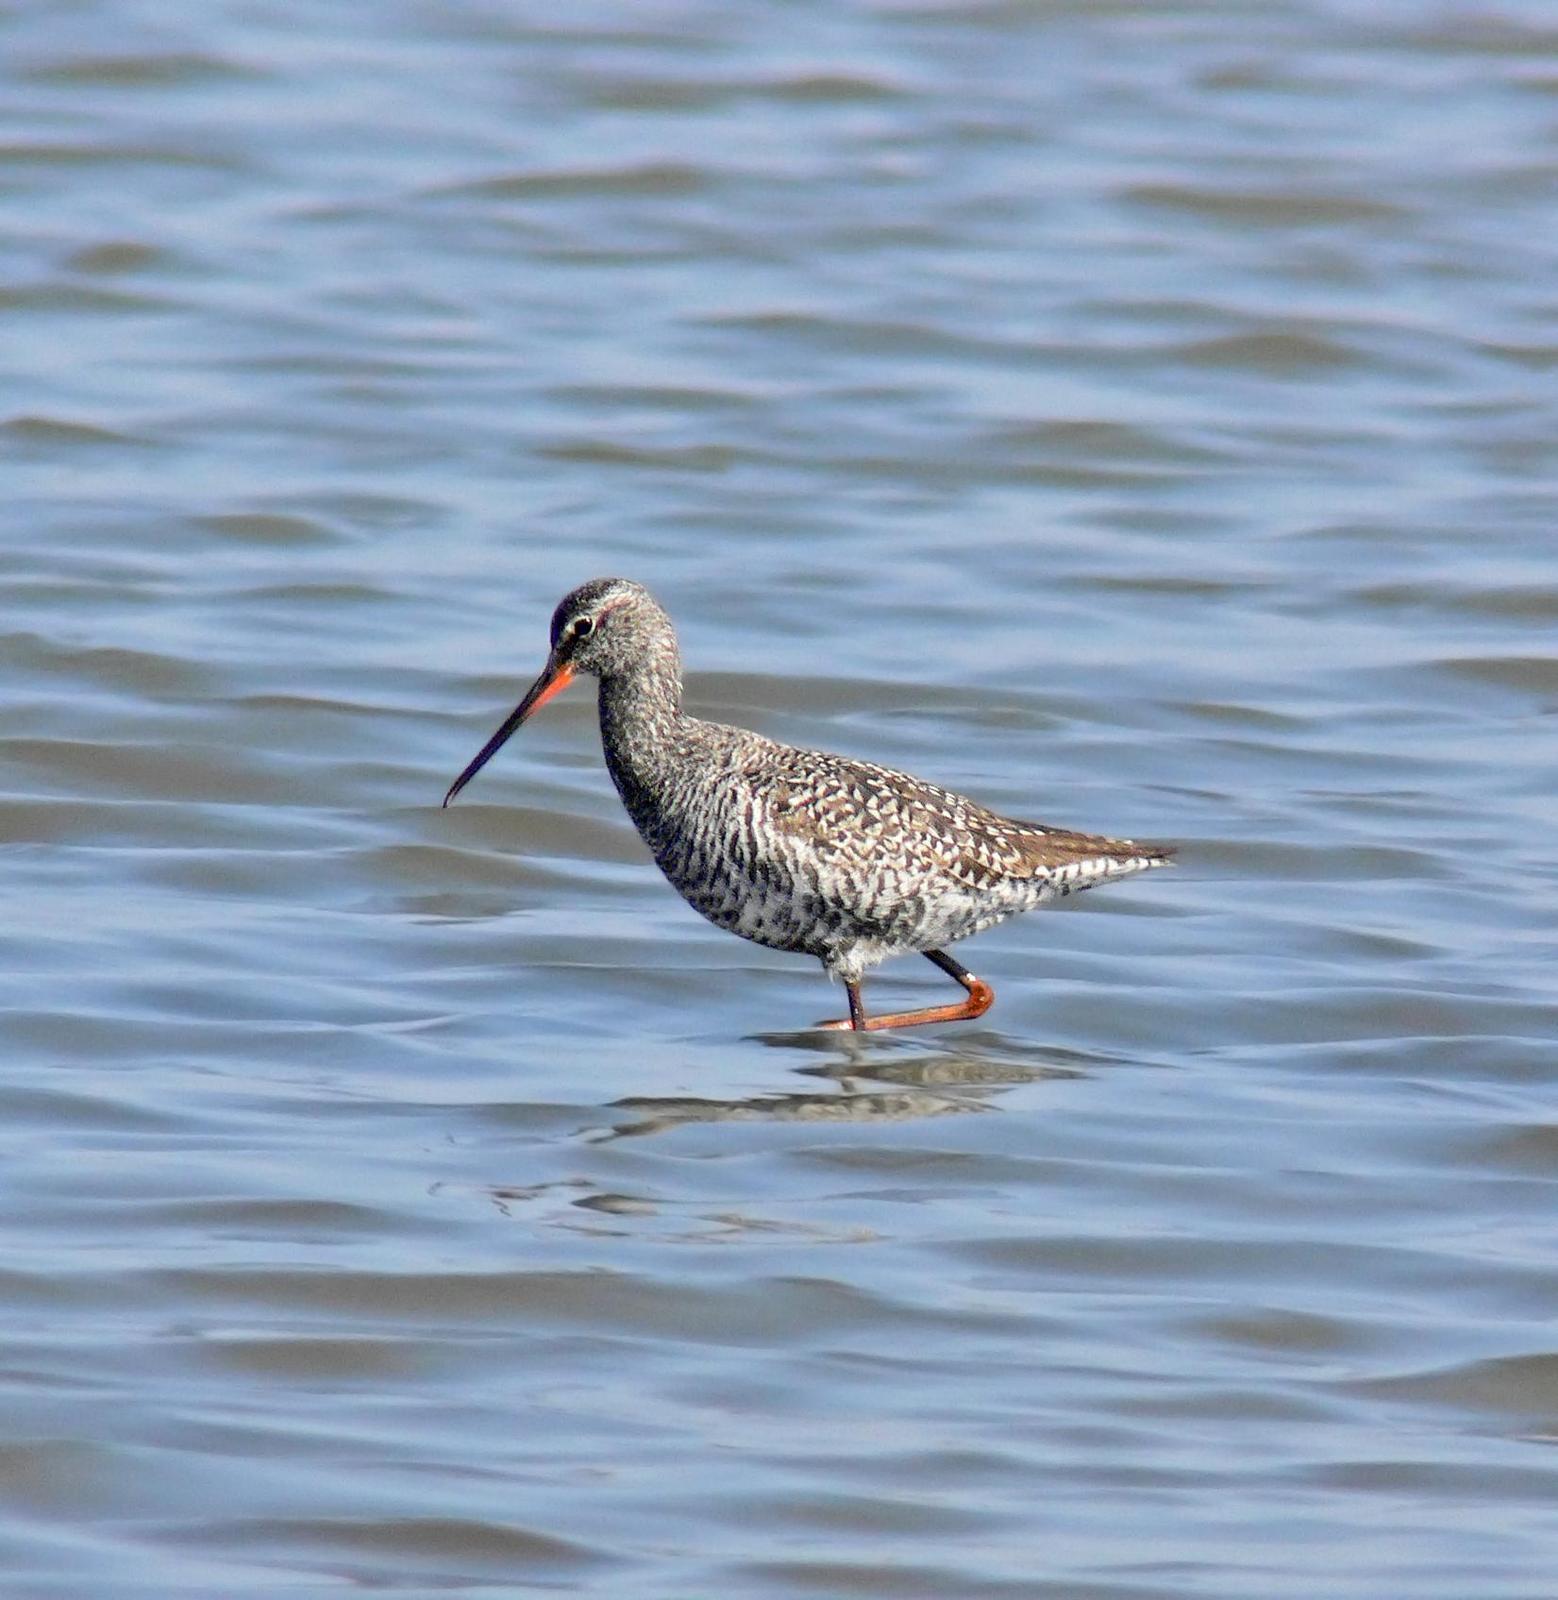 Spotted Redshank Photo by Steven Mlodinow